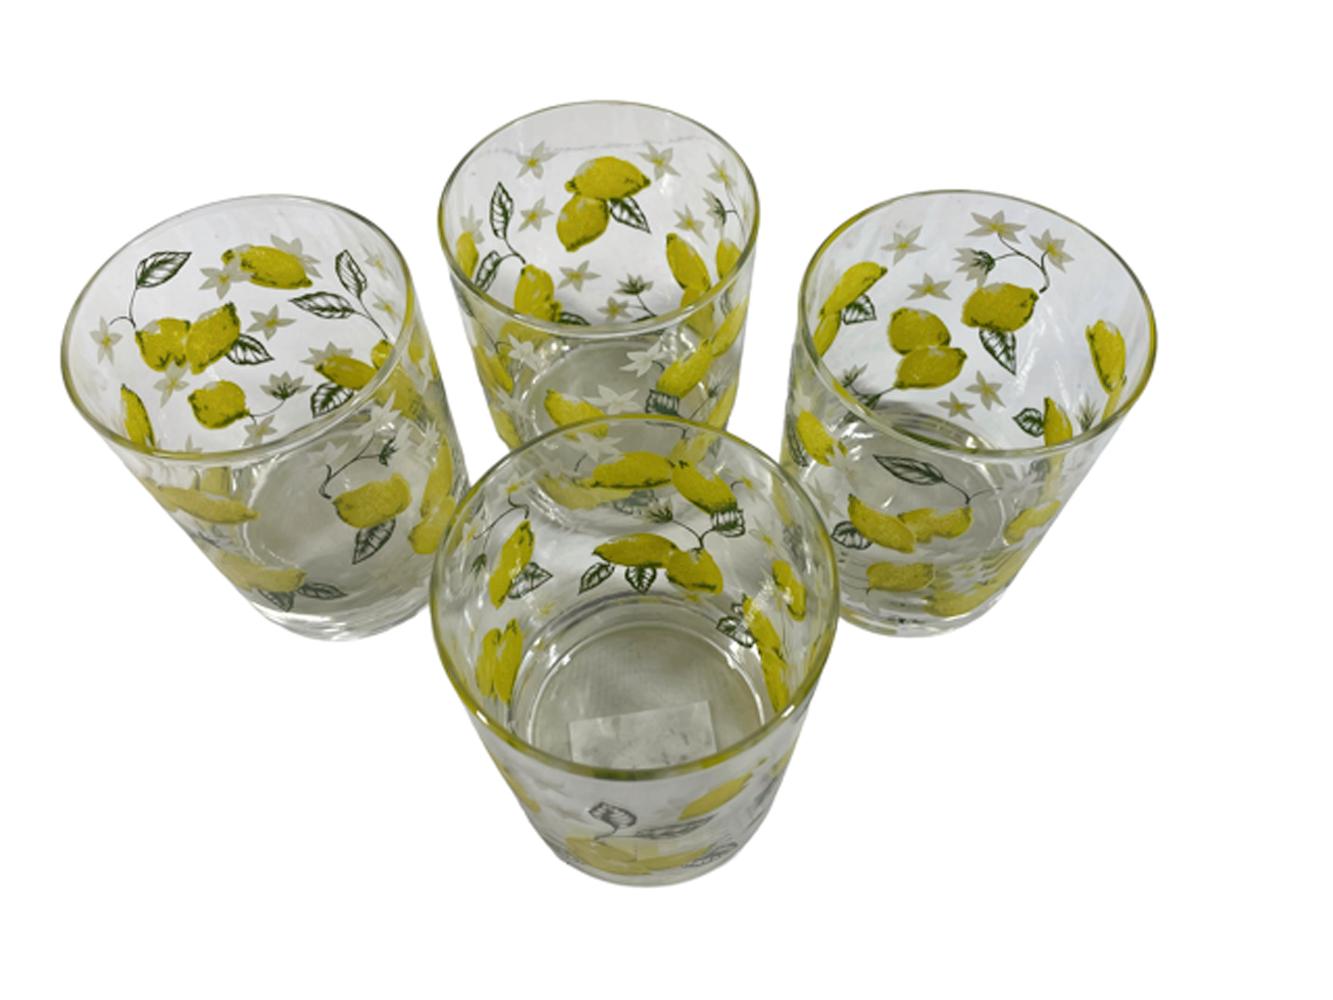 Four vintage rocks glassed by Cera Glass with lemons, leaves and blossoms in yellow, green and white on clear glass.